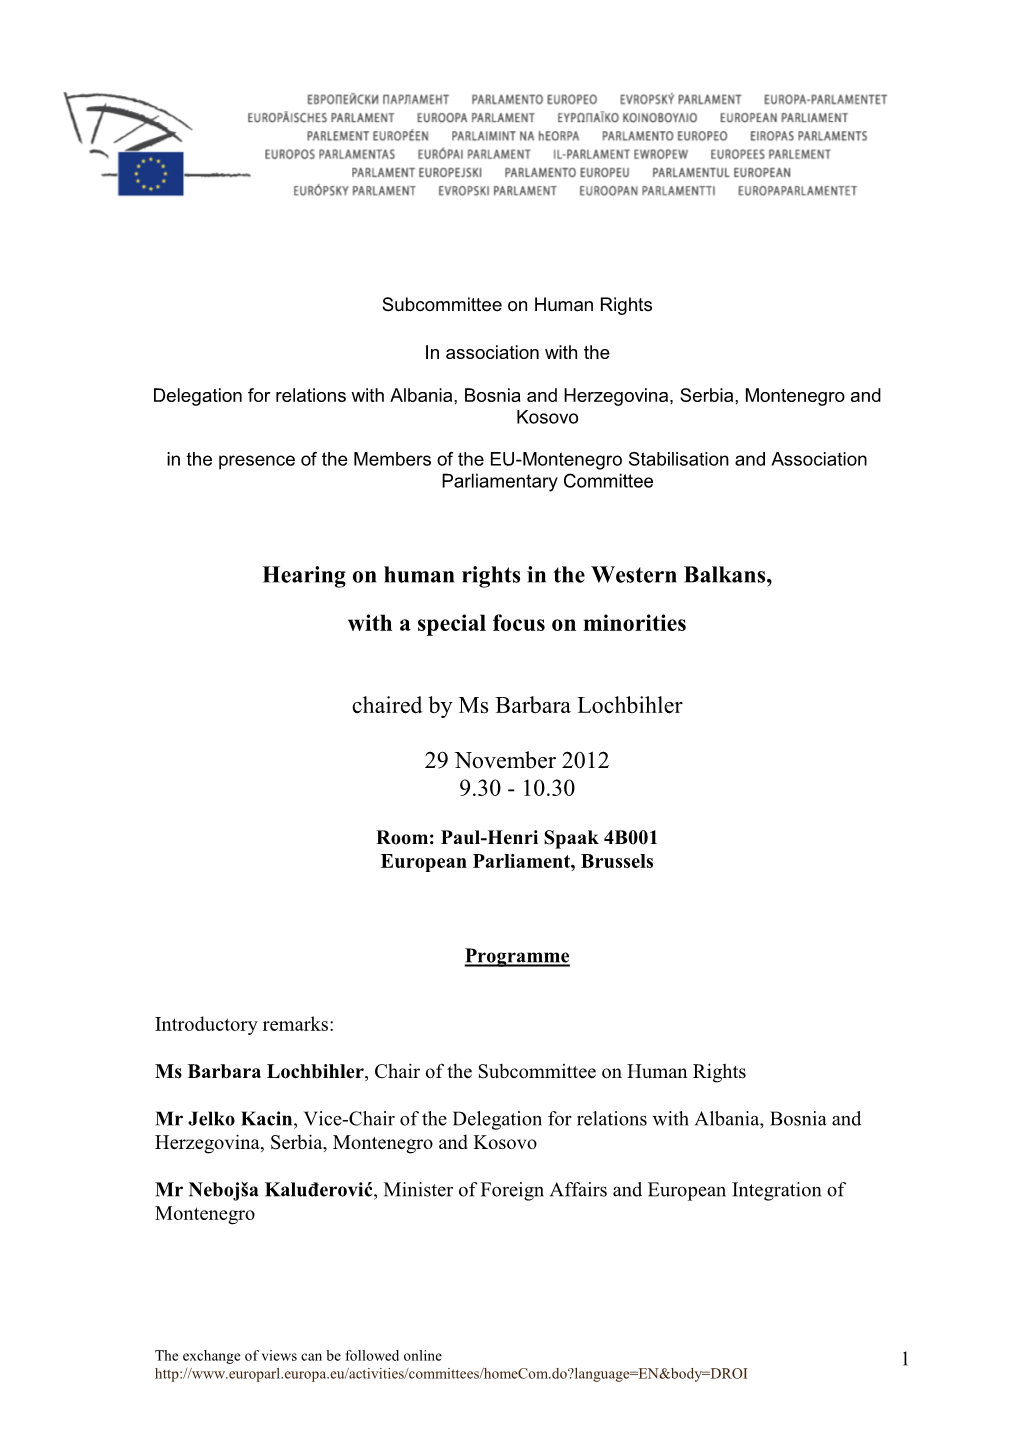 Hearing on Human Rights in the Western Balkans, with a Special